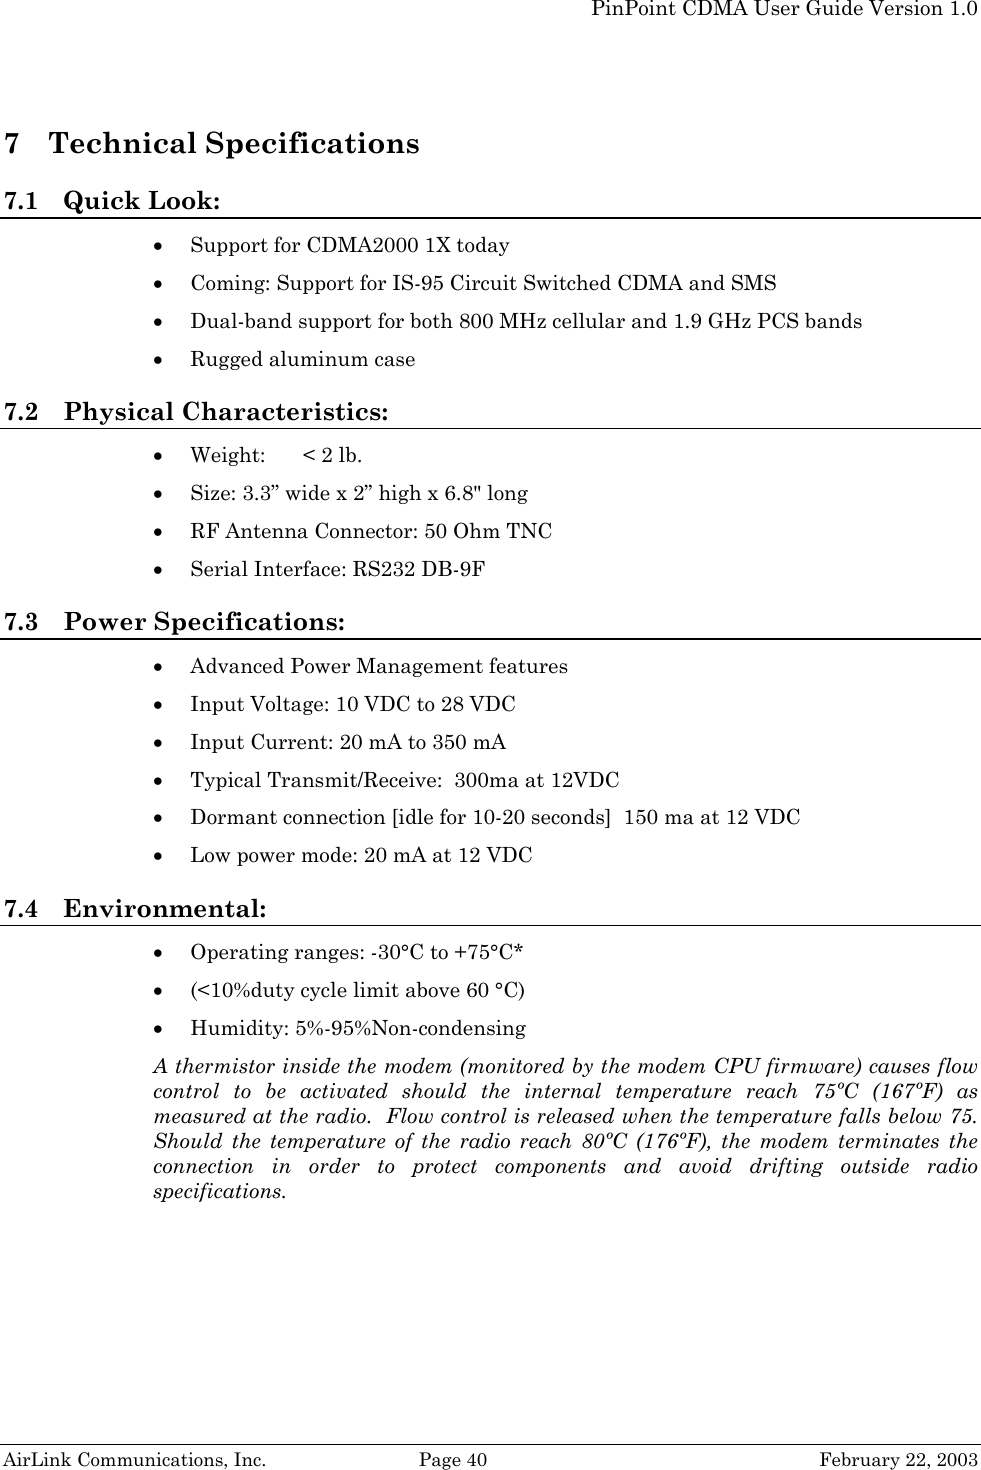   PinPoint CDMA User Guide Version 1.0   AirLink Communications, Inc.  Page 40  February 22, 2003 7 Technical Specifications 7.1 Quick Look: • Support for CDMA2000 1X today • Coming: Support for IS-95 Circuit Switched CDMA and SMS • Dual-band support for both 800 MHz cellular and 1.9 GHz PCS bands • Rugged aluminum case 7.2 Physical Characteristics: • Weight:  &lt; 2 lb. • Size: 3.3” wide x 2” high x 6.8&quot; long  • RF Antenna Connector: 50 Ohm TNC • Serial Interface: RS232 DB-9F 7.3 Power Specifications:   • Advanced Power Management features • Input Voltage: 10 VDC to 28 VDC • Input Current: 20 mA to 350 mA • Typical Transmit/Receive:  300ma at 12VDC • Dormant connection [idle for 10-20 seconds]  150 ma at 12 VDC • Low power mode: 20 mA at 12 VDC 7.4 Environmental: • Operating ranges: -30°C to +75°C* • (&lt;10%duty cycle limit above 60 °C) • Humidity: 5%-95%Non-condensing A thermistor inside the modem (monitored by the modem CPU firmware) causes flow control to be activated should the internal temperature reach 75ºC (167ºF) as measured at the radio.  Flow control is released when the temperature falls below 75.  Should the temperature of the radio reach 80ºC (176ºF), the modem terminates the connection in order to protect components and avoid drifting outside radio specifications.  